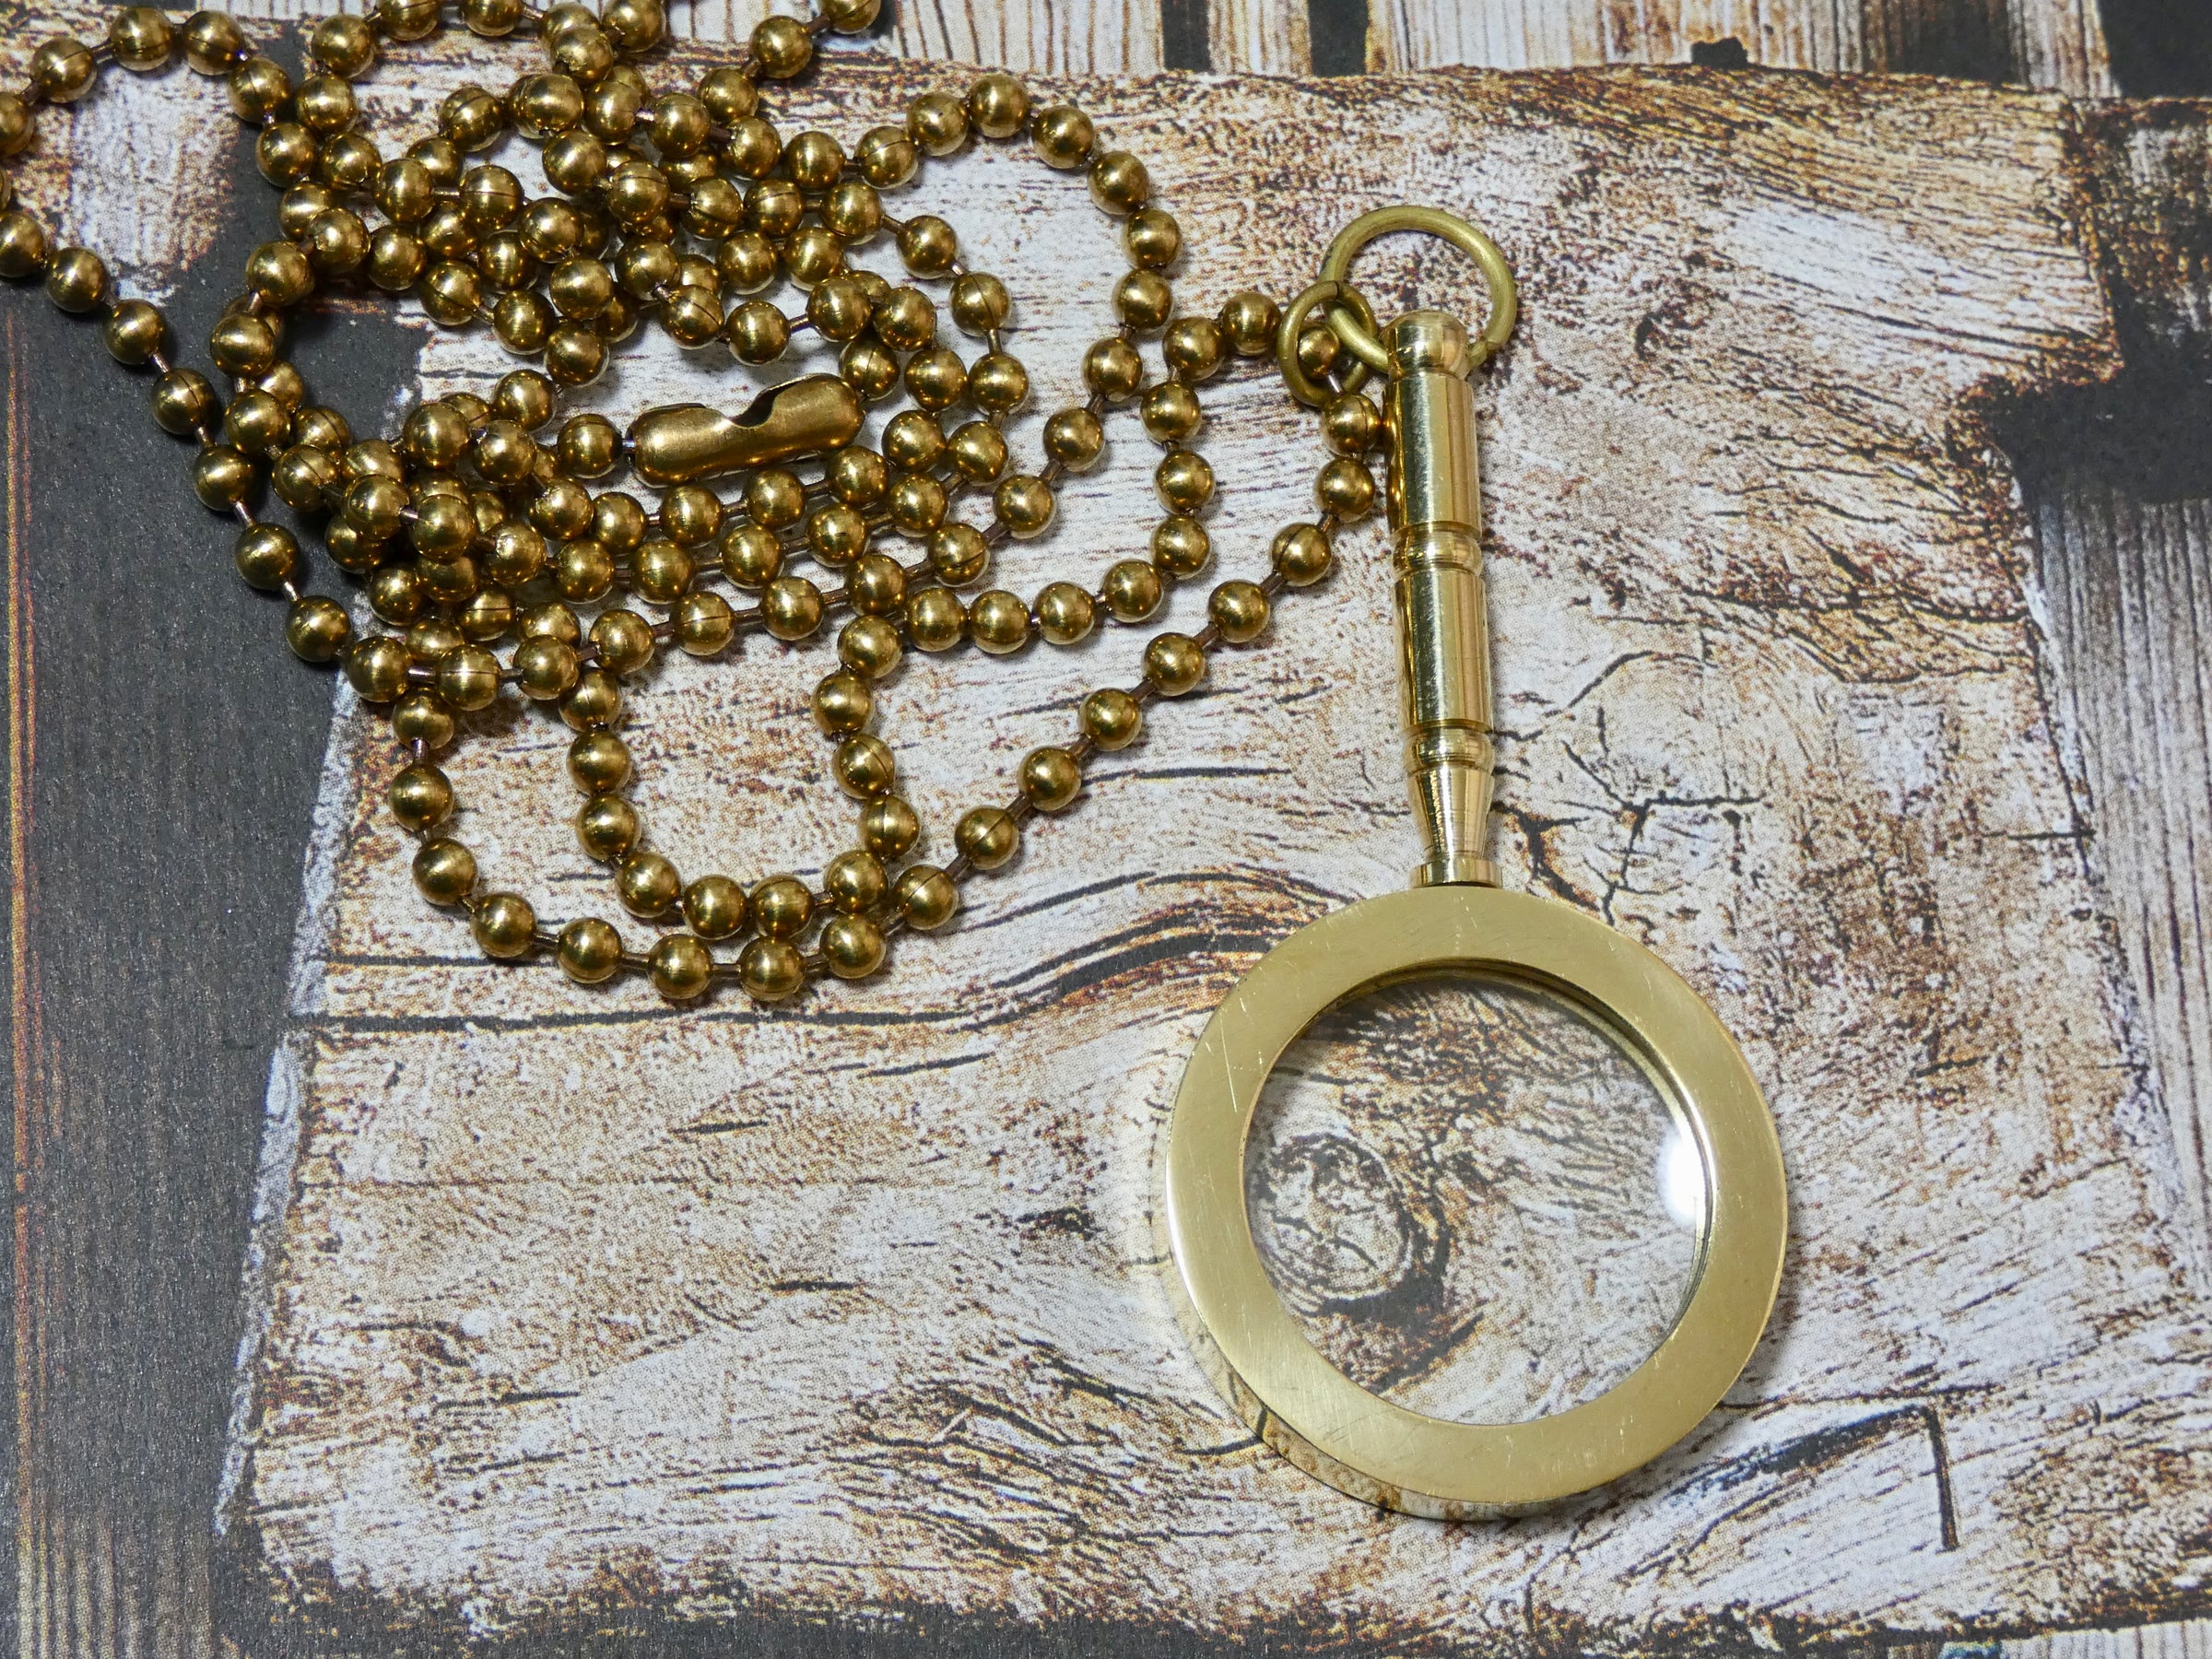 Magnifying Glass Necklace, Brass Handle Pendant – Upcycled Works